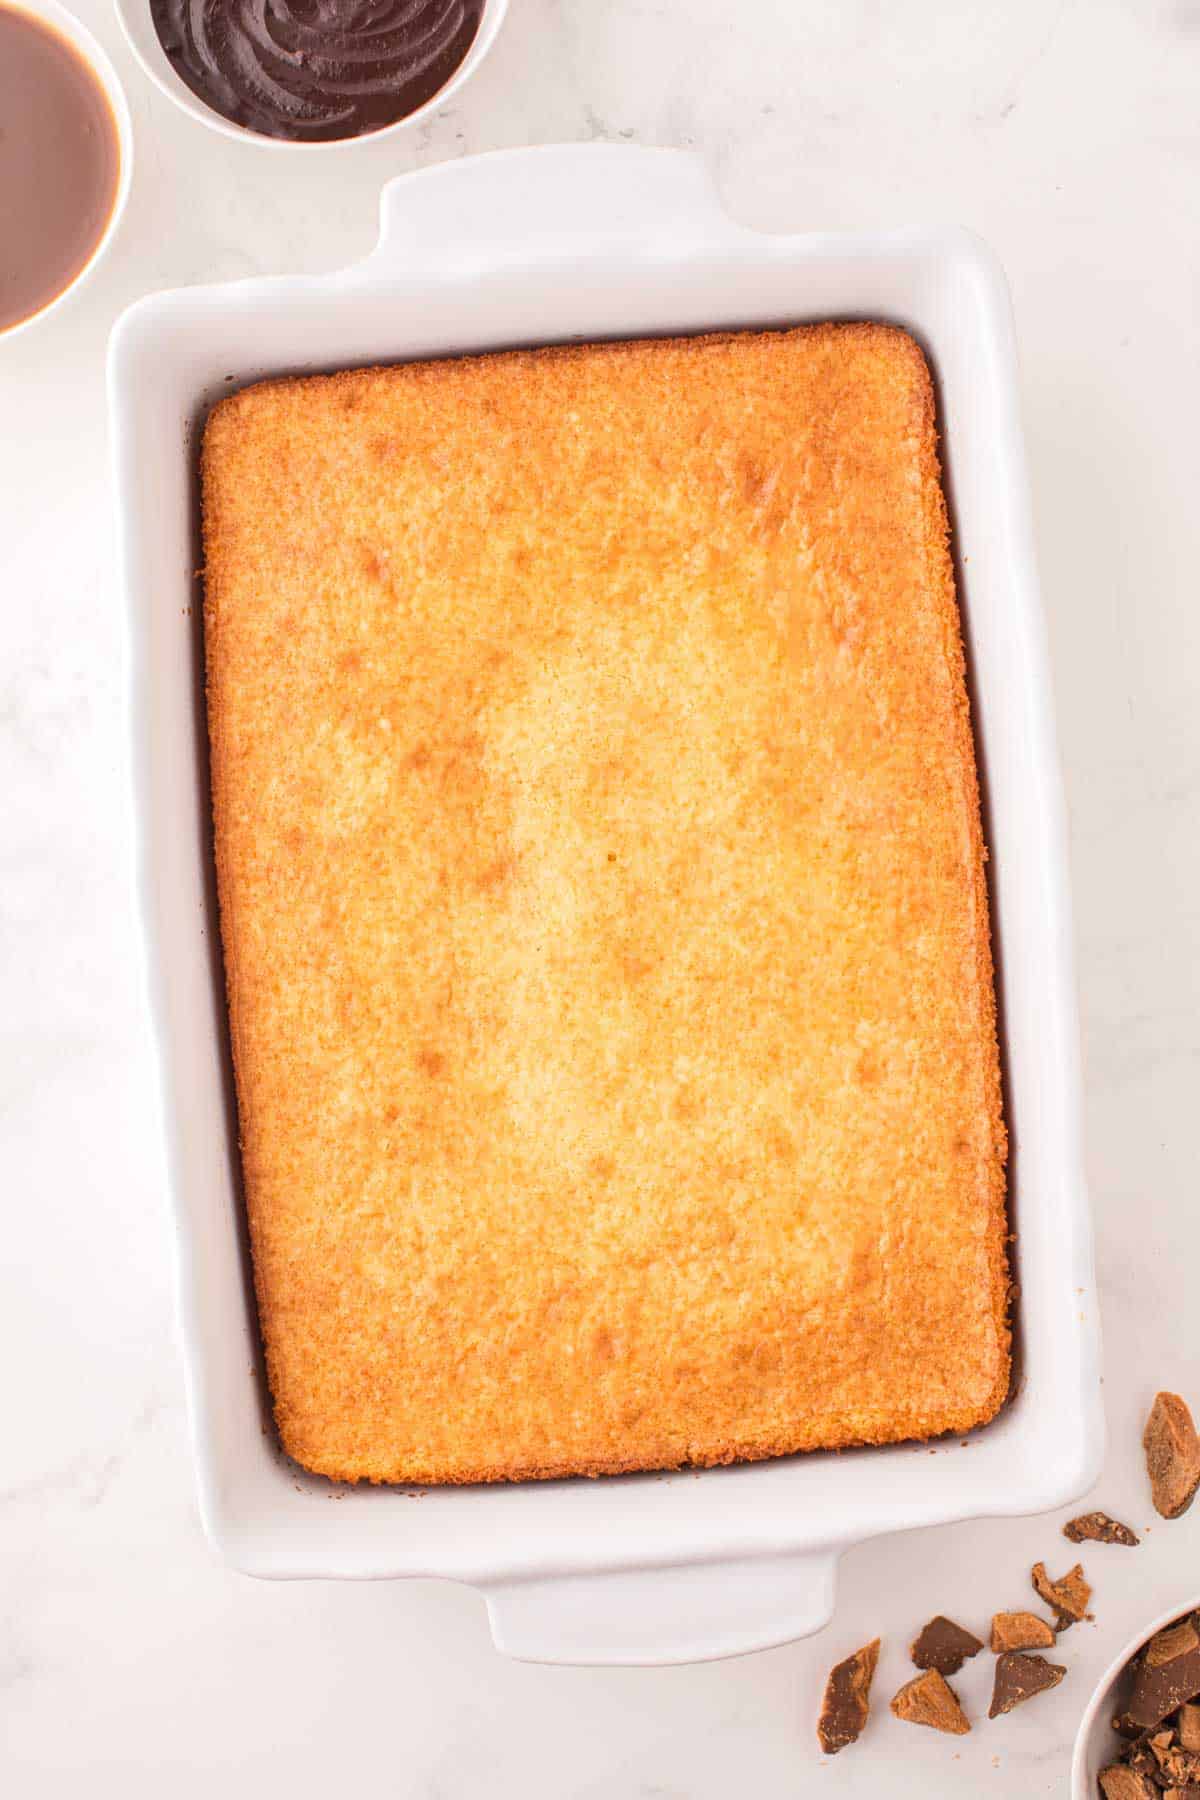 baked 9 x 13 inch cake in a pan